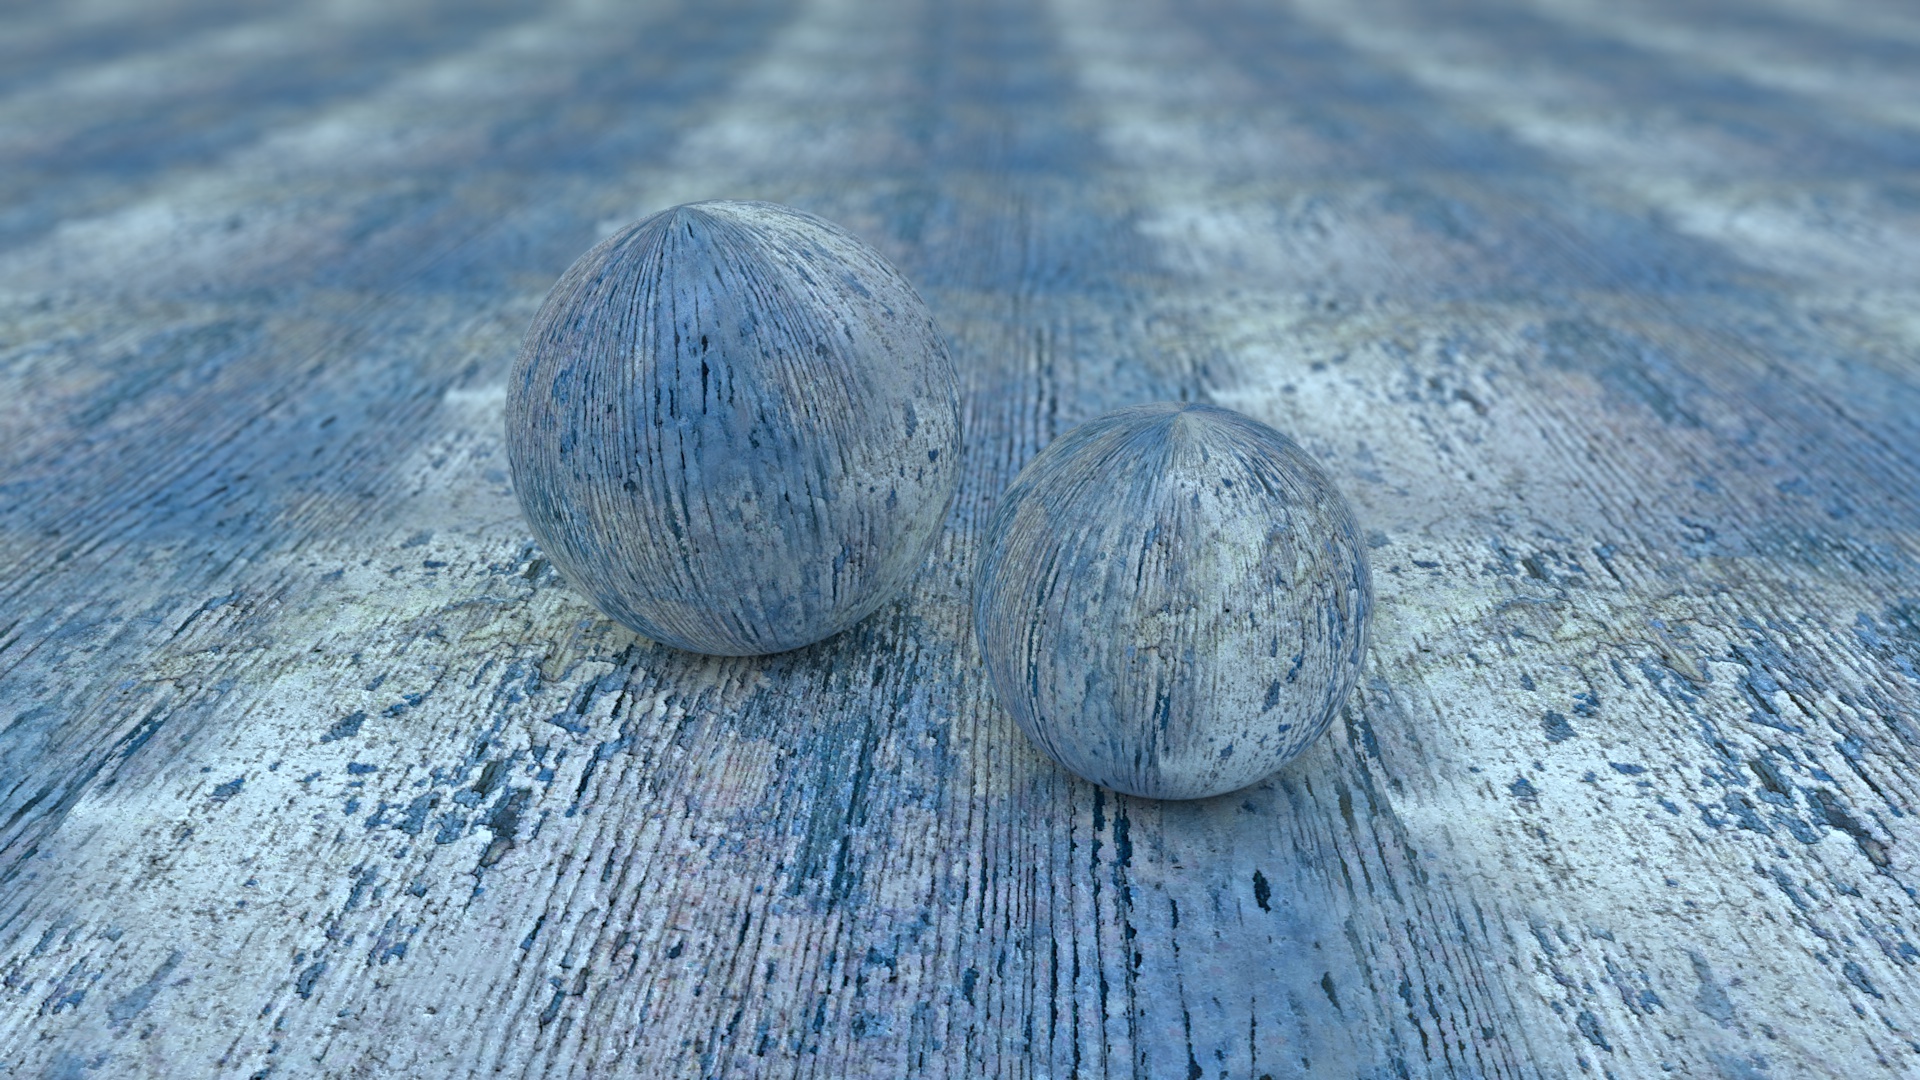 23 Seamless Wood Textures For Cinema4d by 3dtreatment | 3DOcean